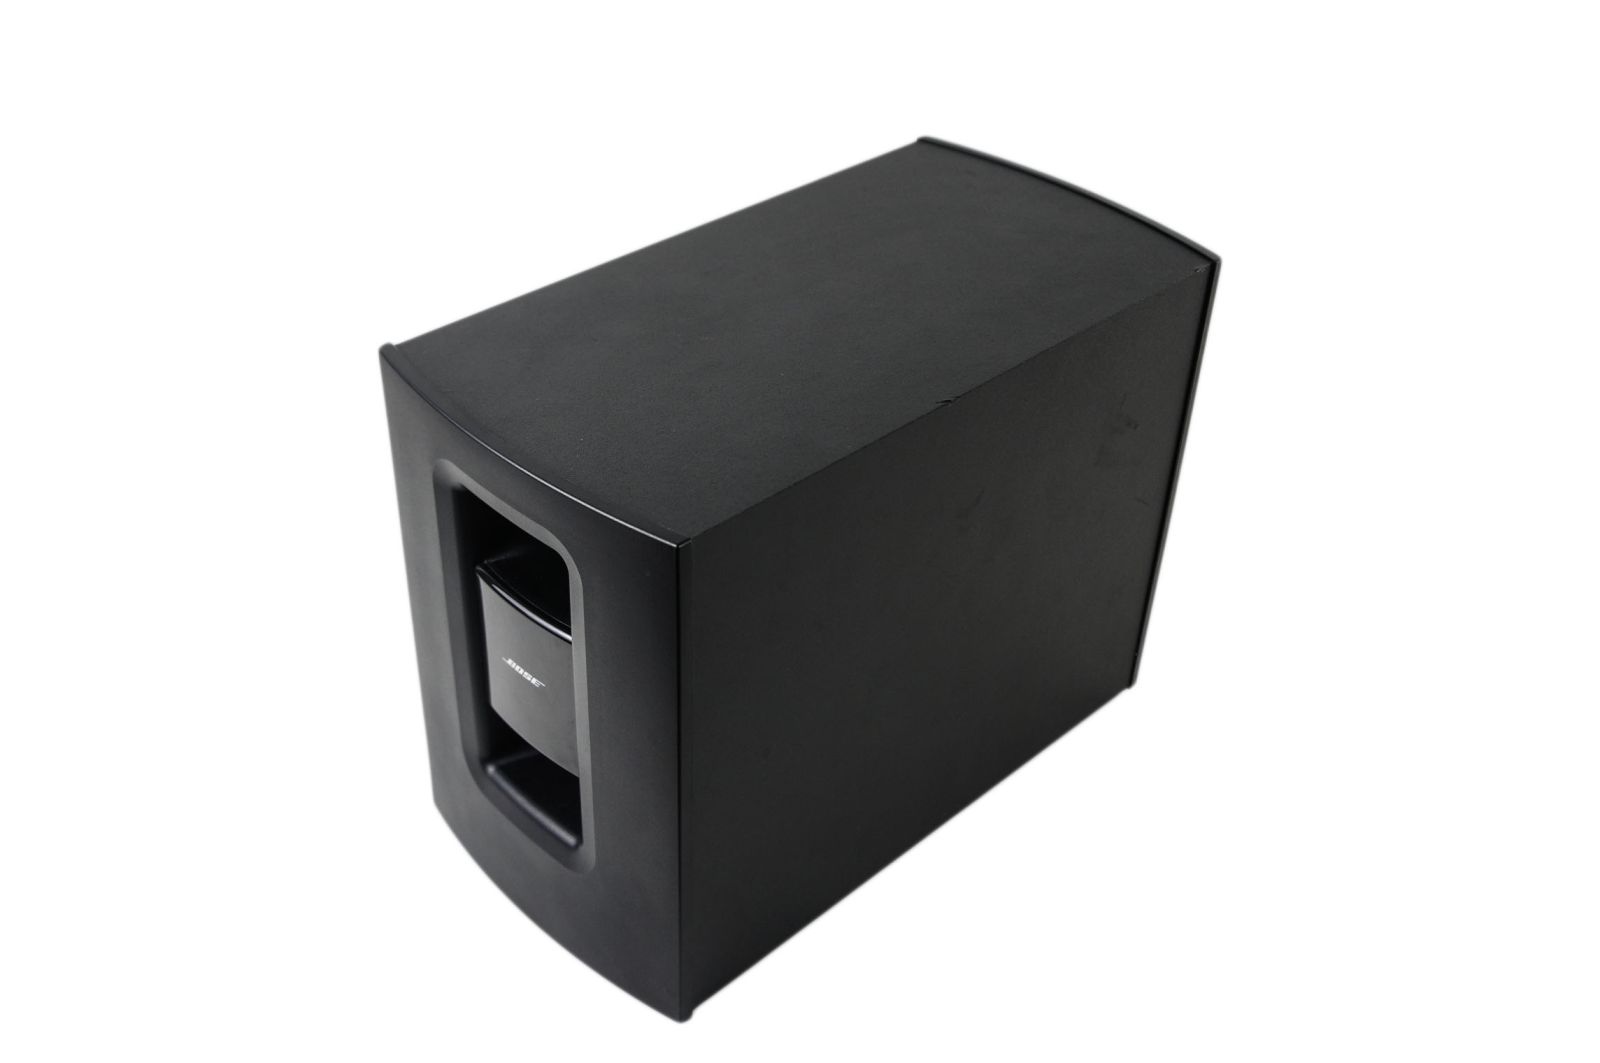 Bose_SoundTouch_120_Heimkino-system_06